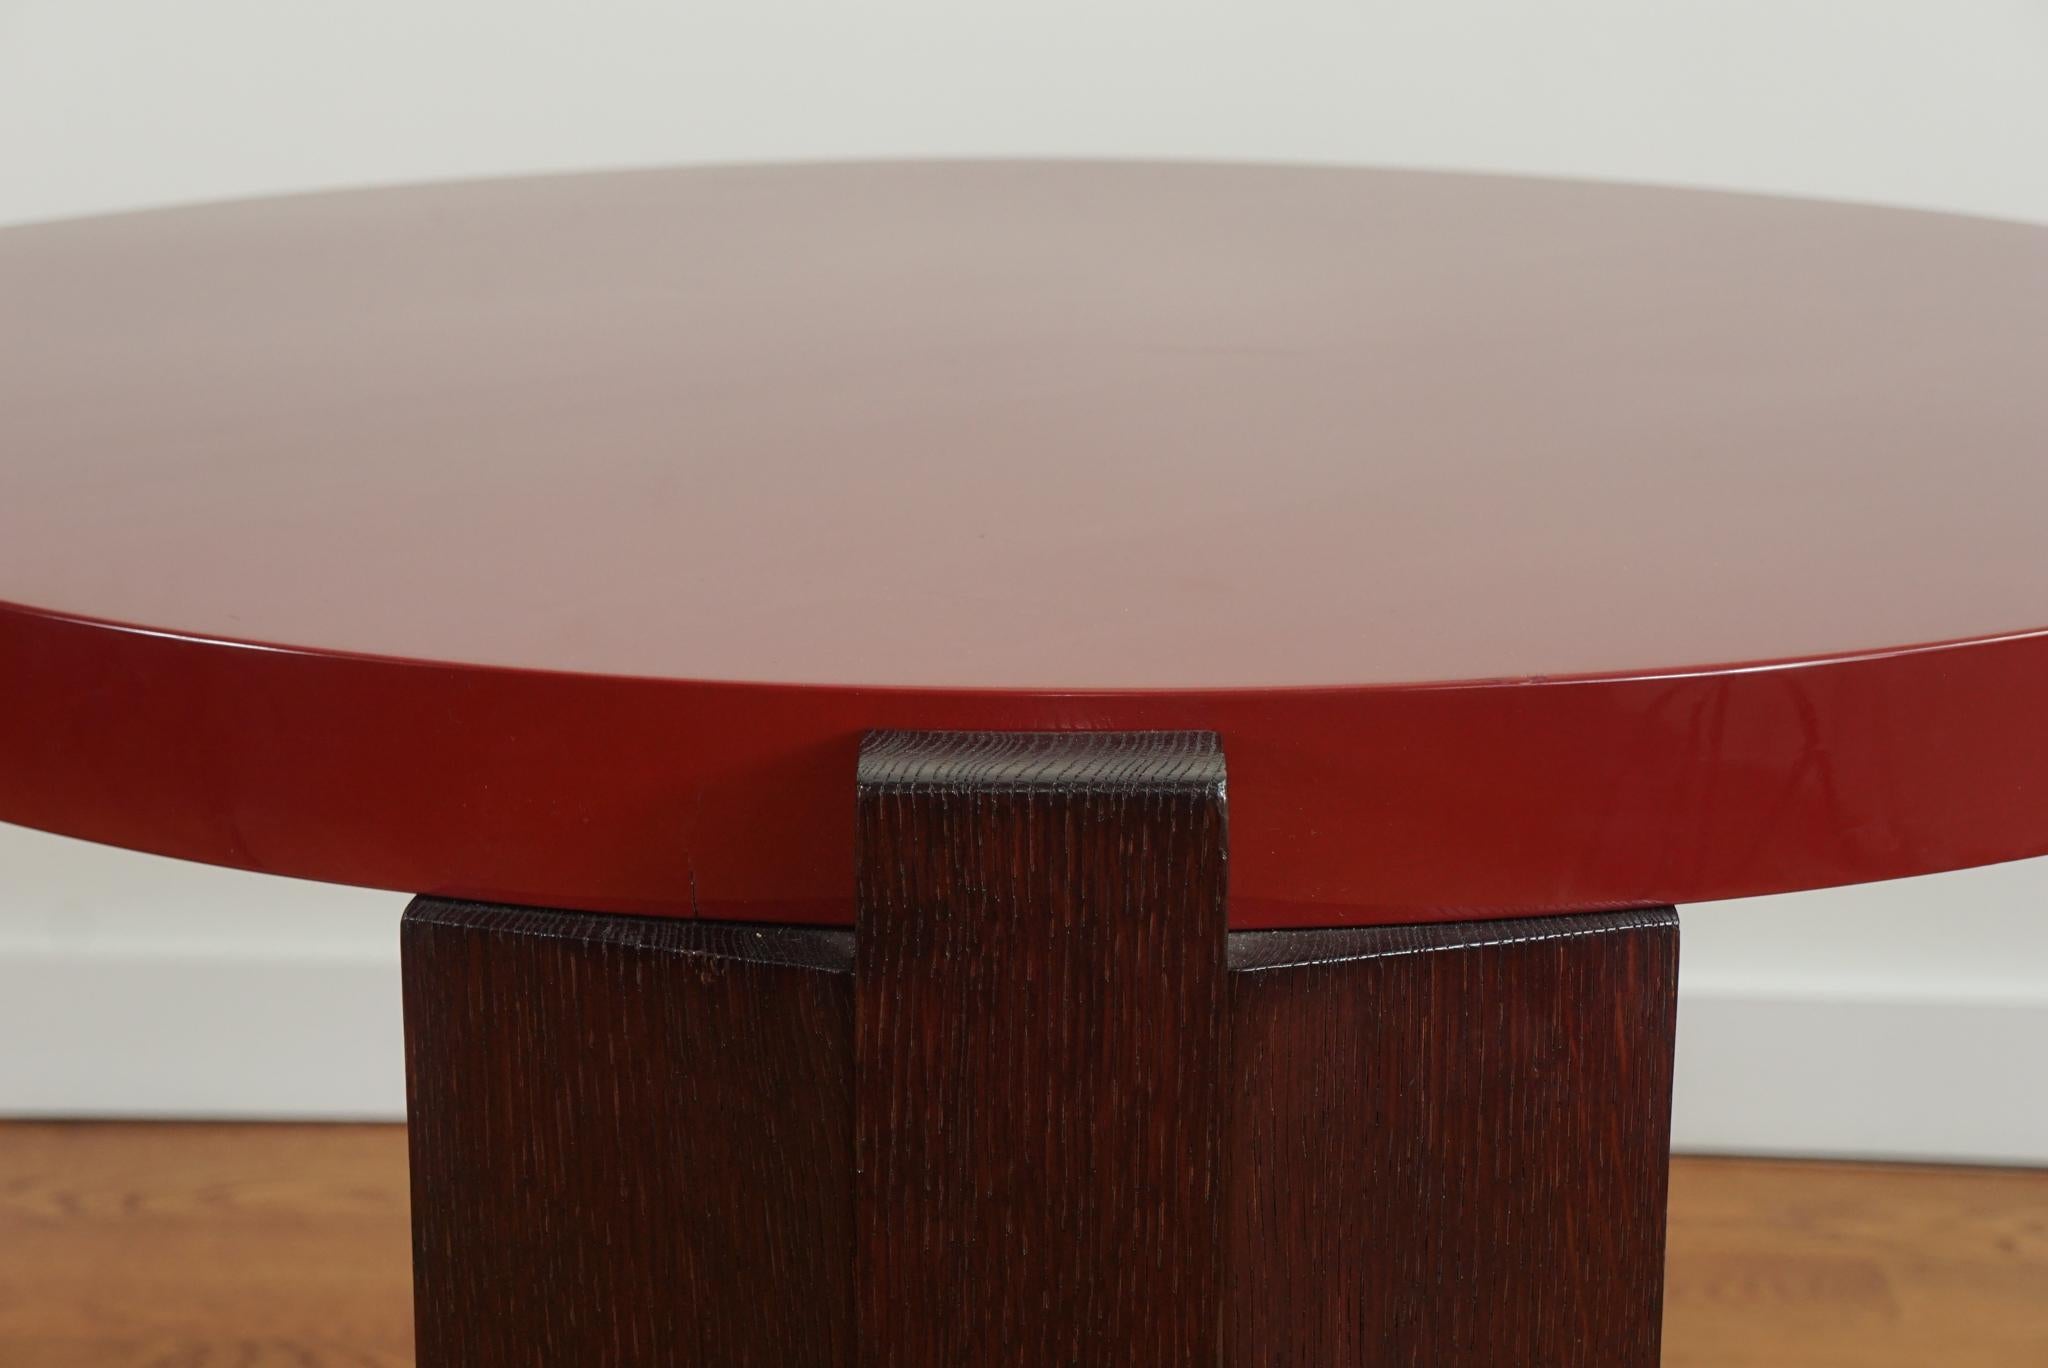 The coffee table shown here is as distinctive for its design as it is its lacquer and wood finishes.  Signed by Ducarroy, the oak round coffee table features a red lacquer top and feet with rich, ebony stained legs.   It is classic in every respect